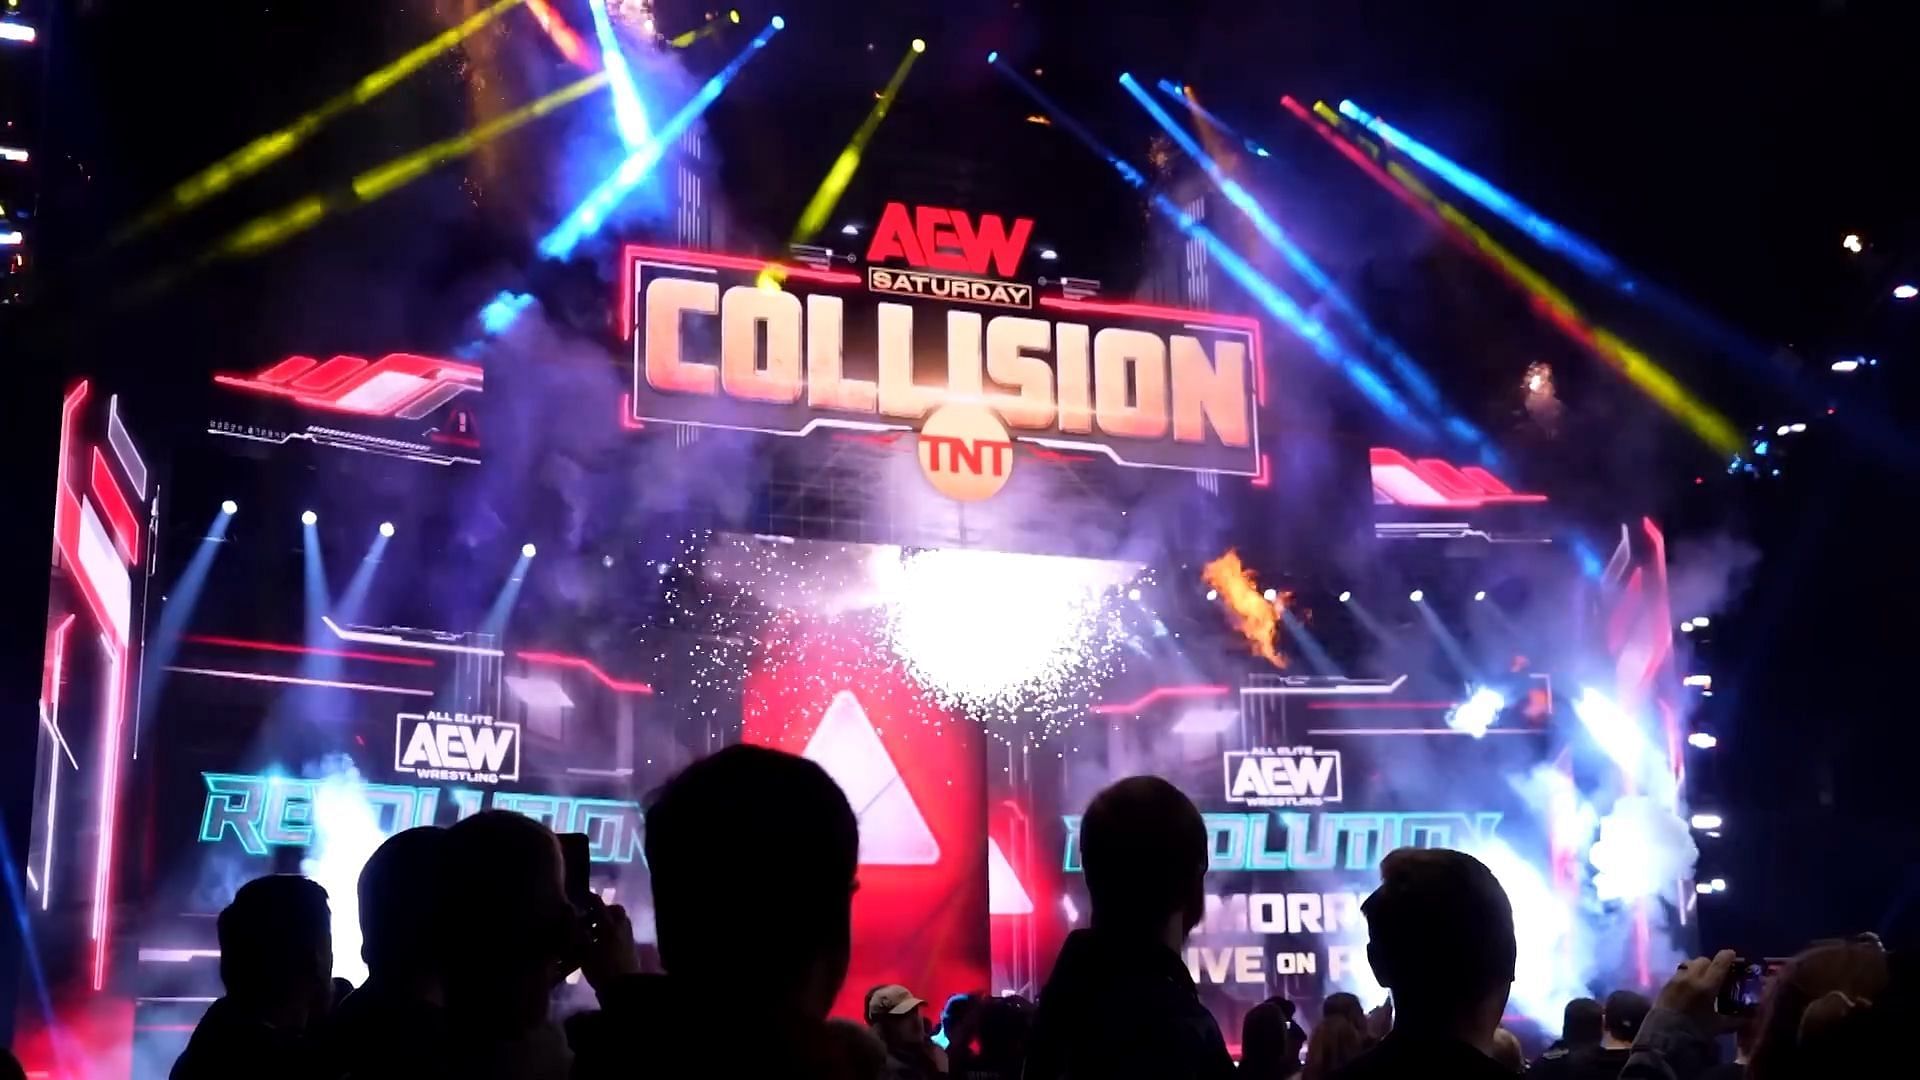 AEW Collision airs on Saturday nights (credit: All Elite Wrestling on YouTube)